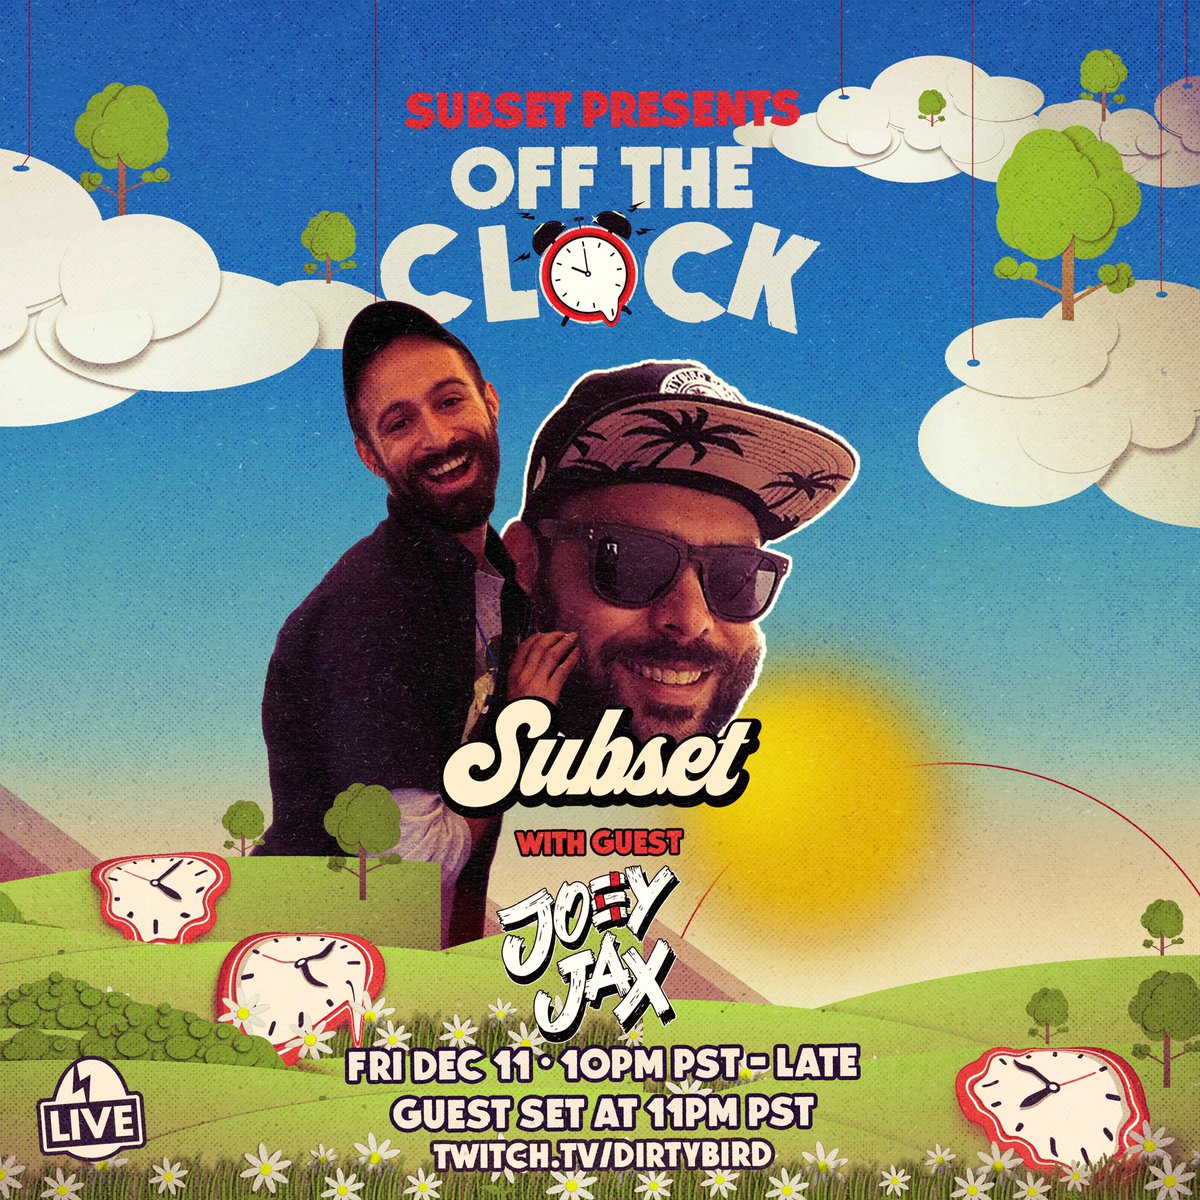 The one, the only @itsjoeyjax is going to be @subsetgetsit’s special guest for Off The Clock tonight ⏱ The ultimate twitch party, see you there at 10pm pt on dirtybirdlive.tv